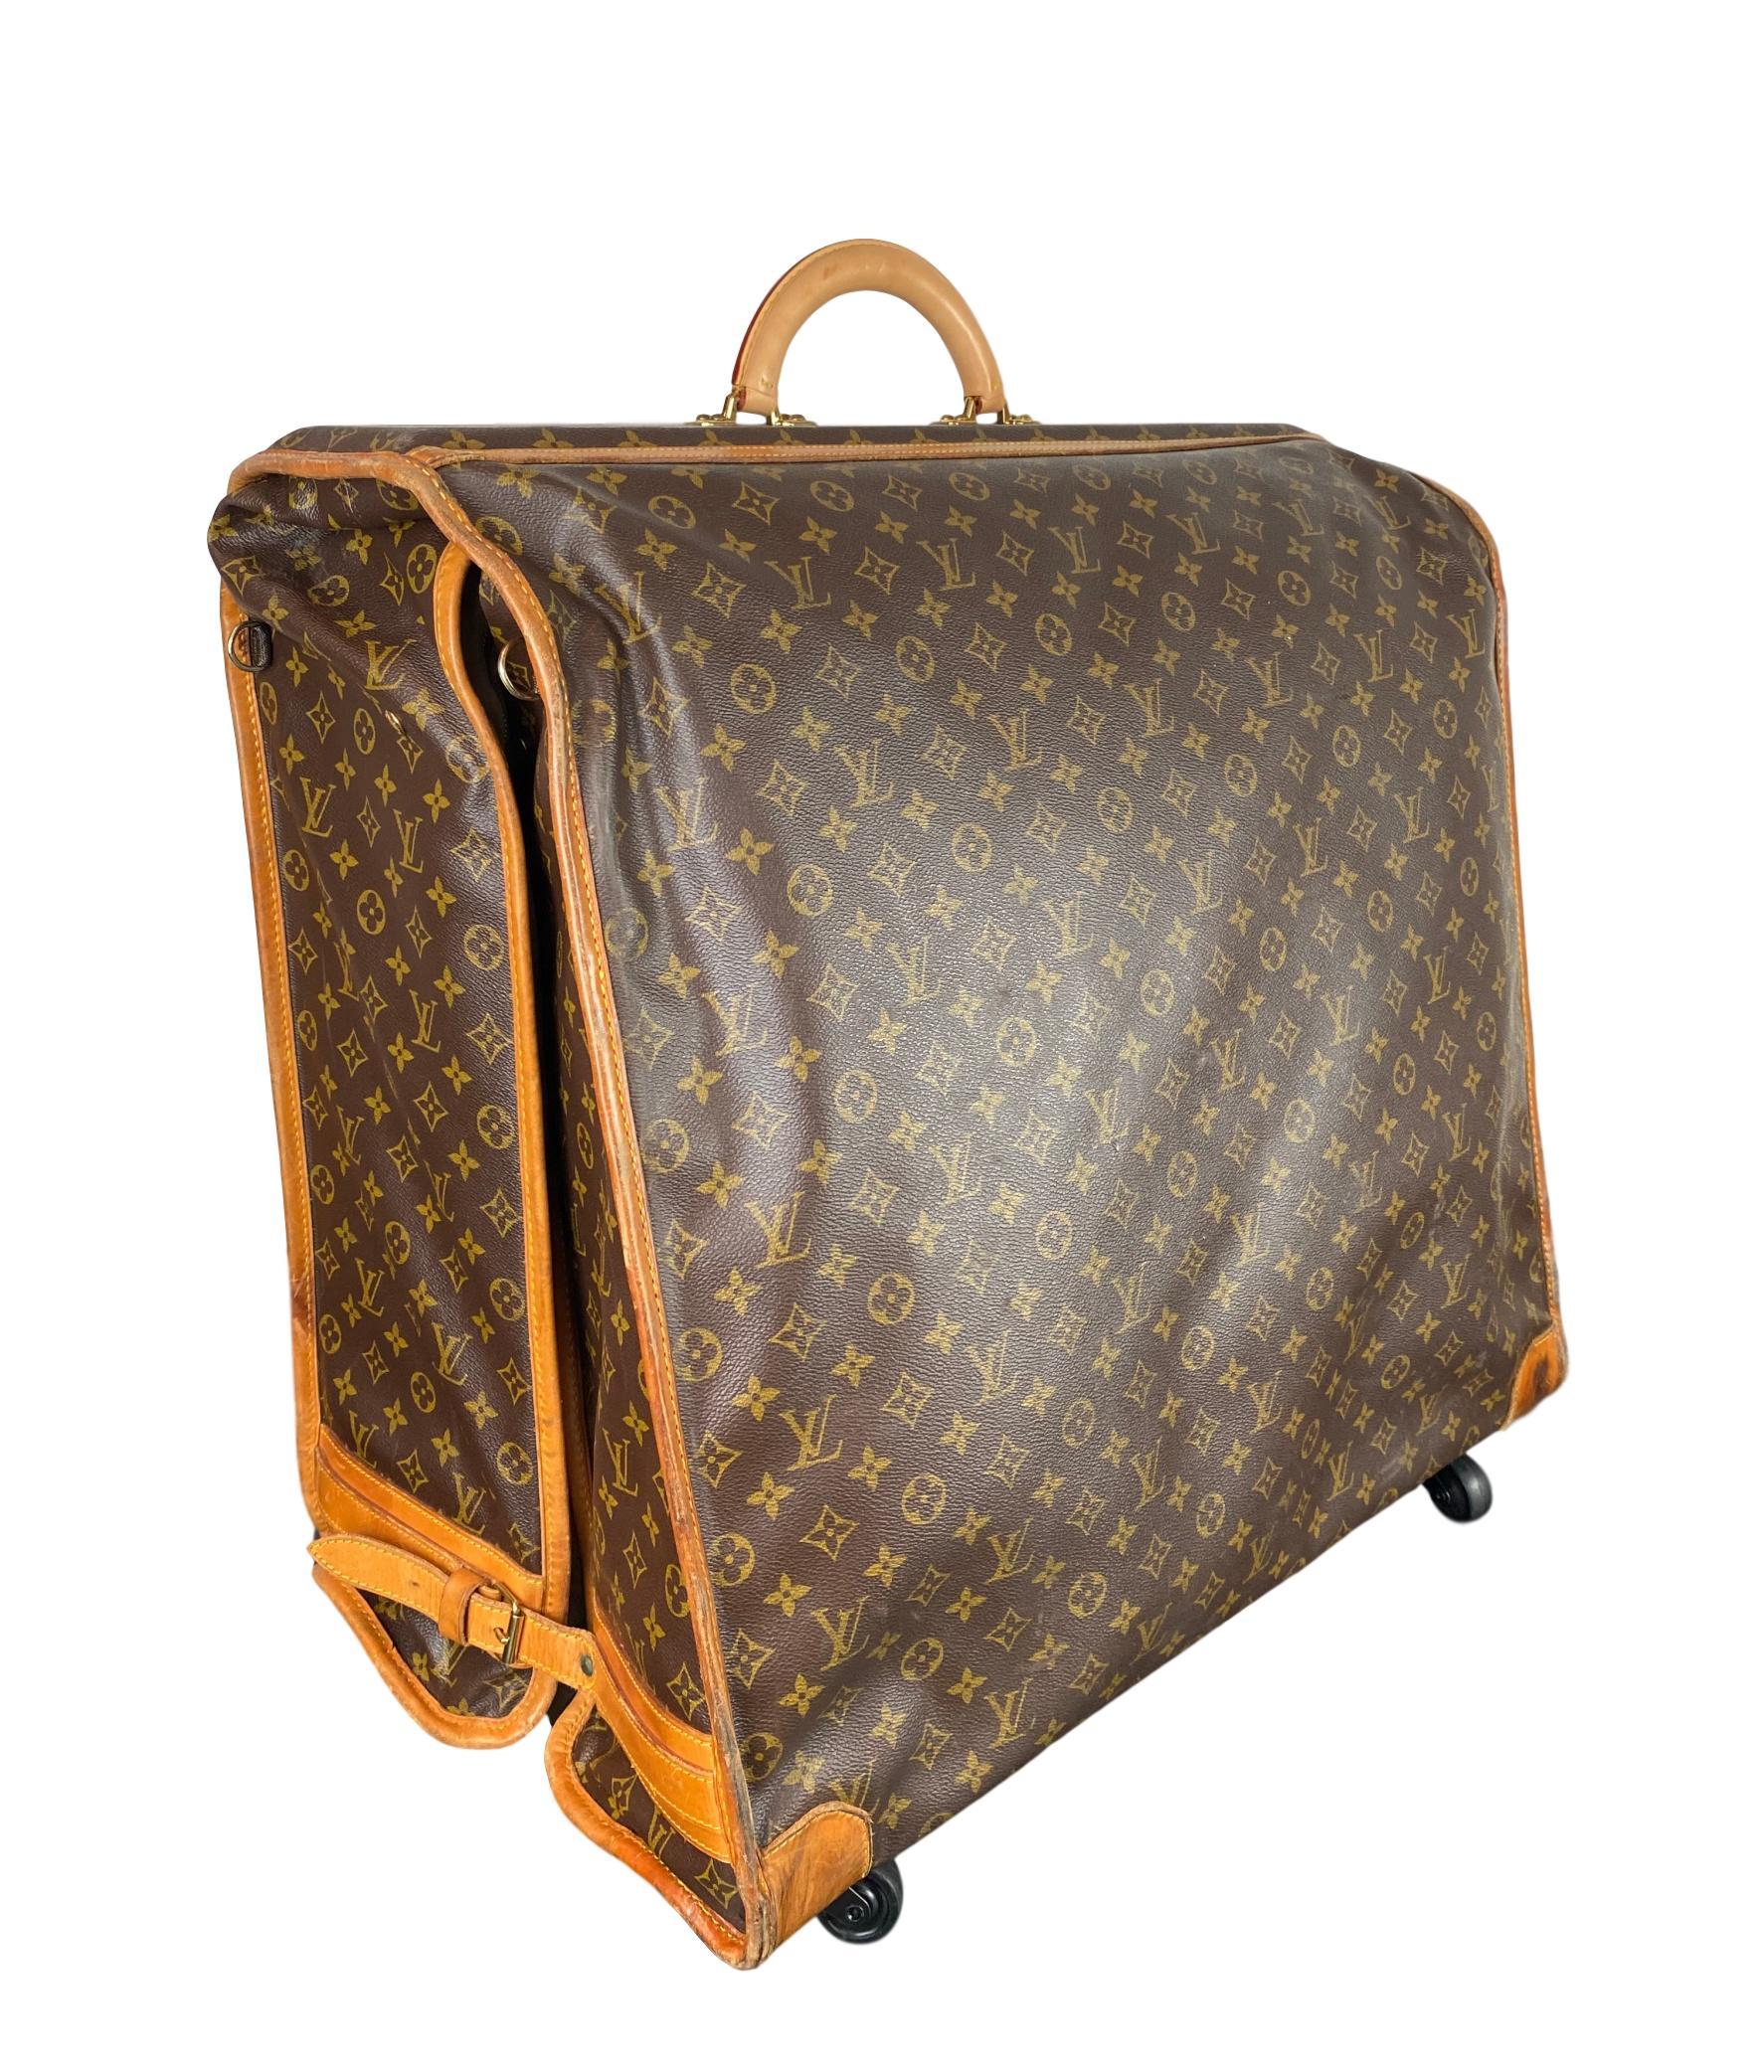 Vintage Louis Vuitton Large Folding Garment Monogram Luggage, circa 1970. This rare vintage garment bag comes in the classic Louis Vuitton Monogram canvas with a brand new rolled top vachetta handle, original vachetta pipping, buckle lock closures